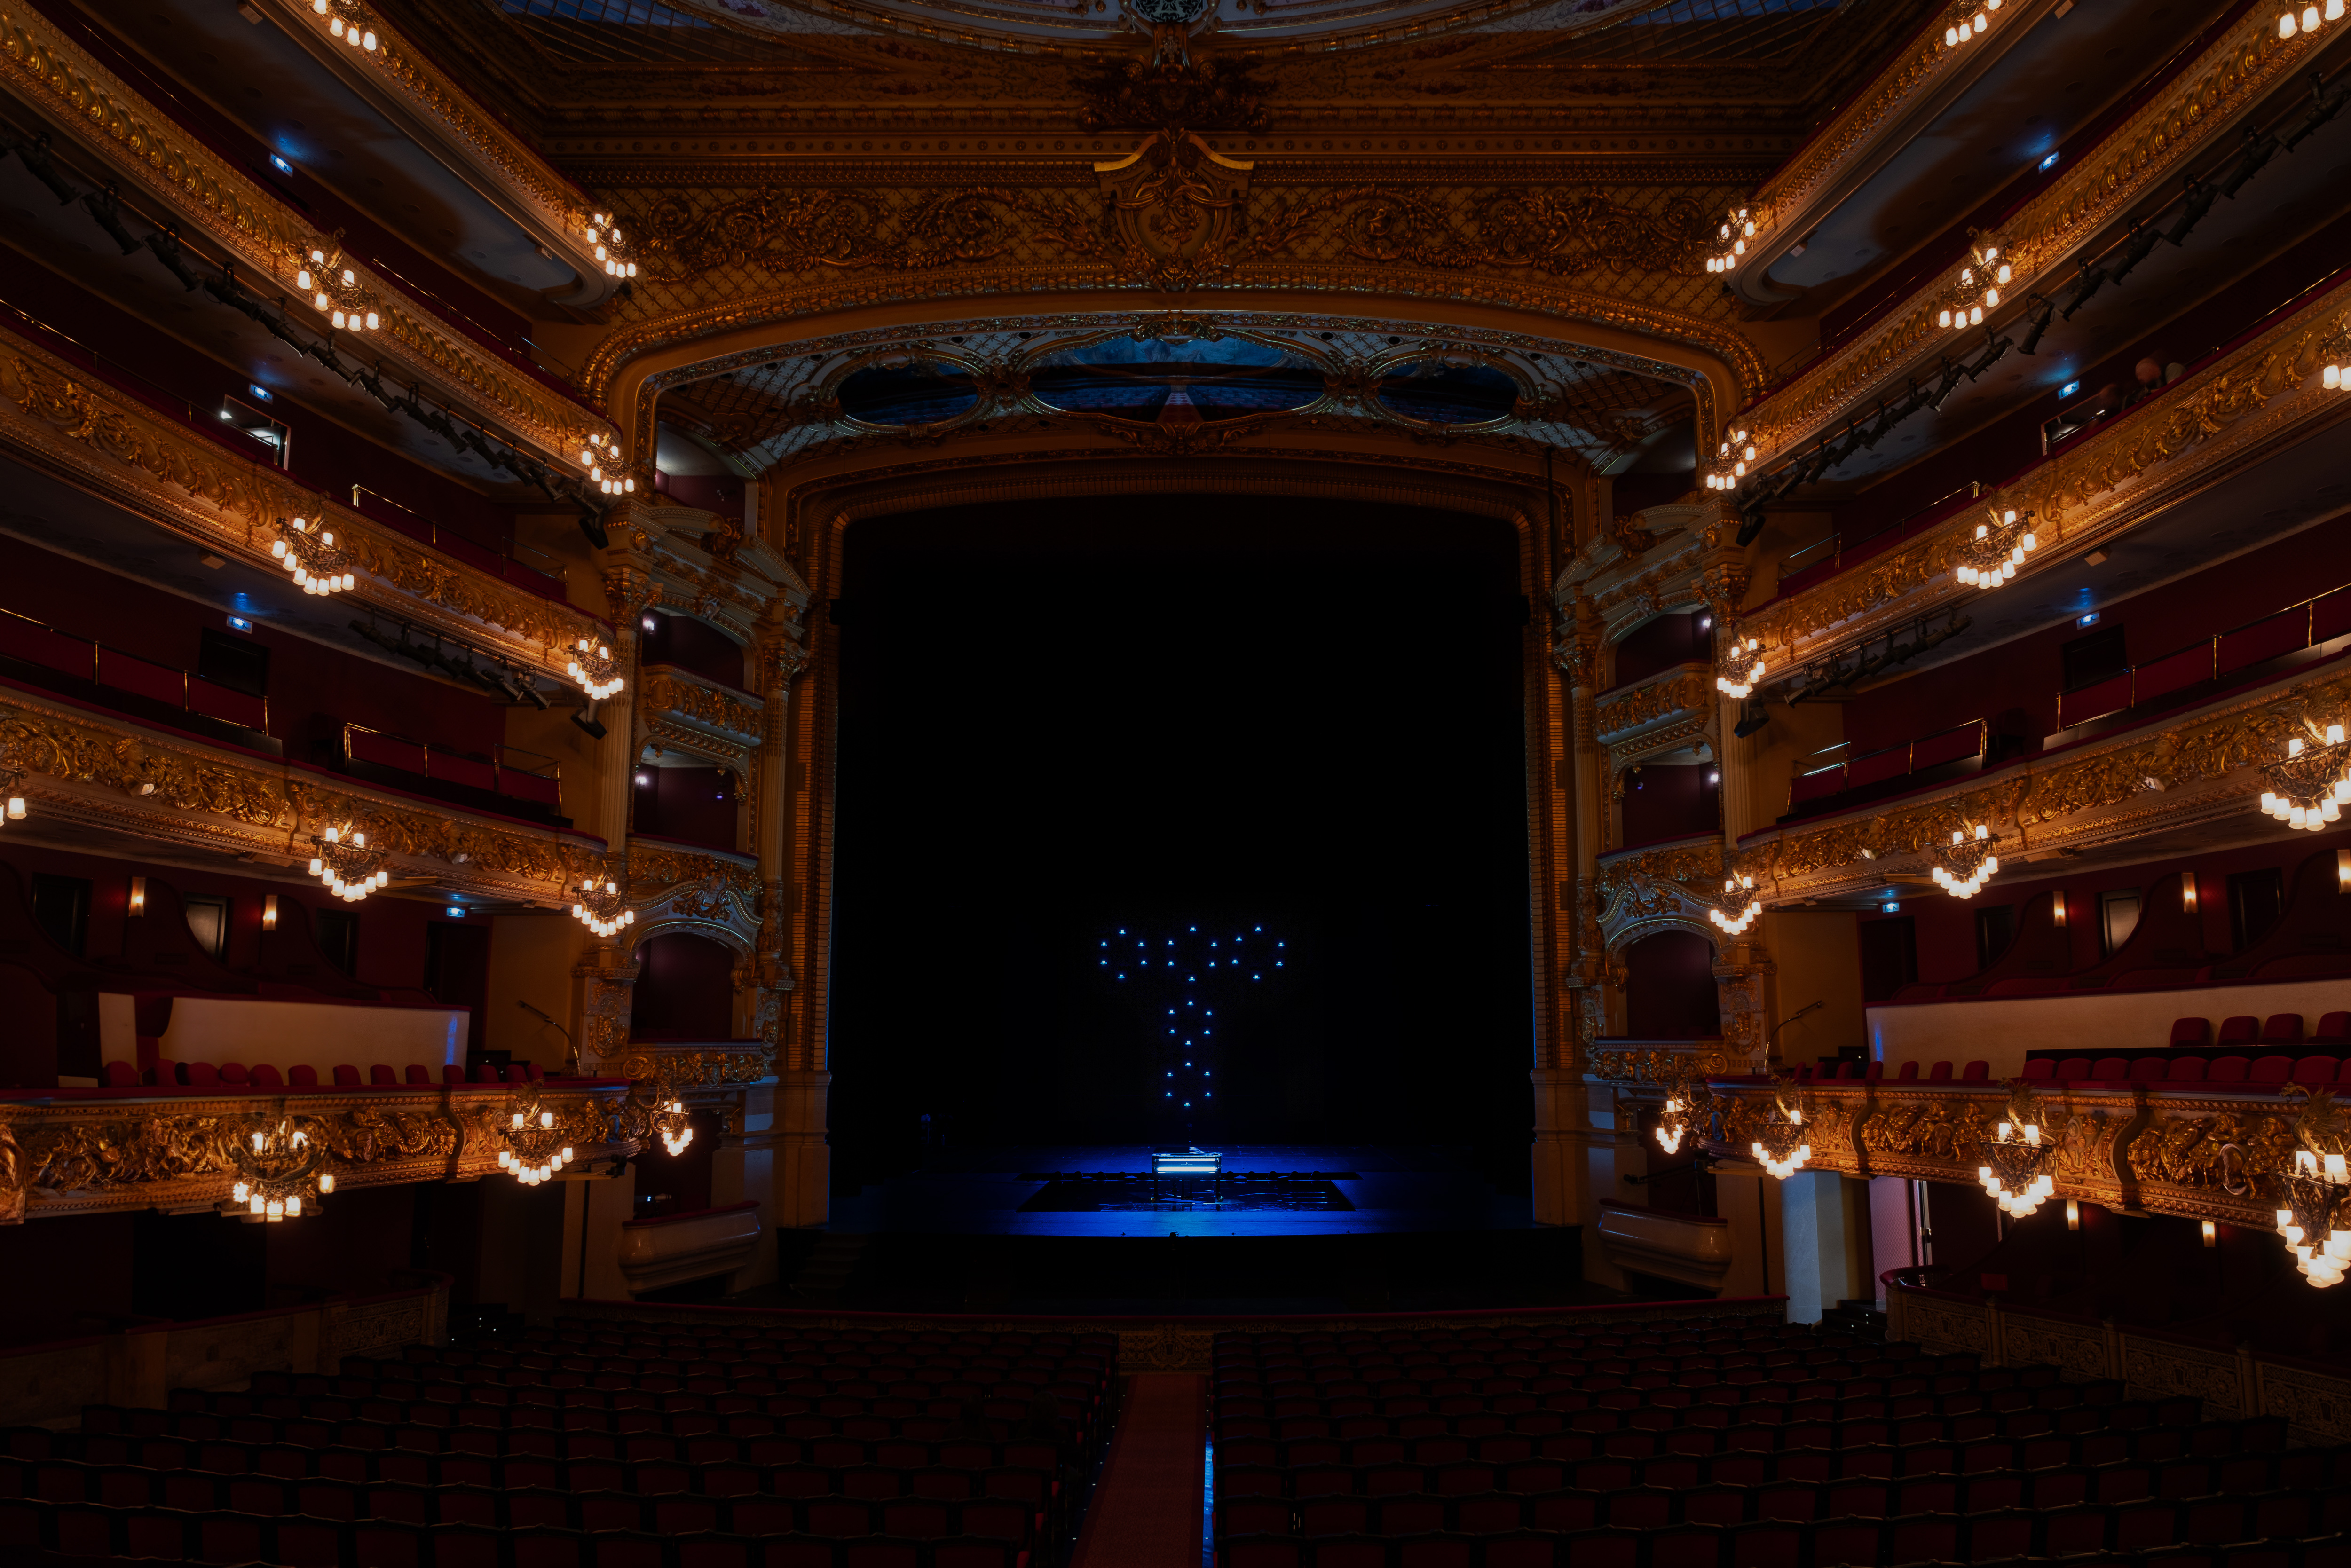 The Gran Teatre del Liceu in Barcelona was the setting for Telefónica's first major event in its centenary year, coinciding with the first day of the Mobile World Congress 2024.